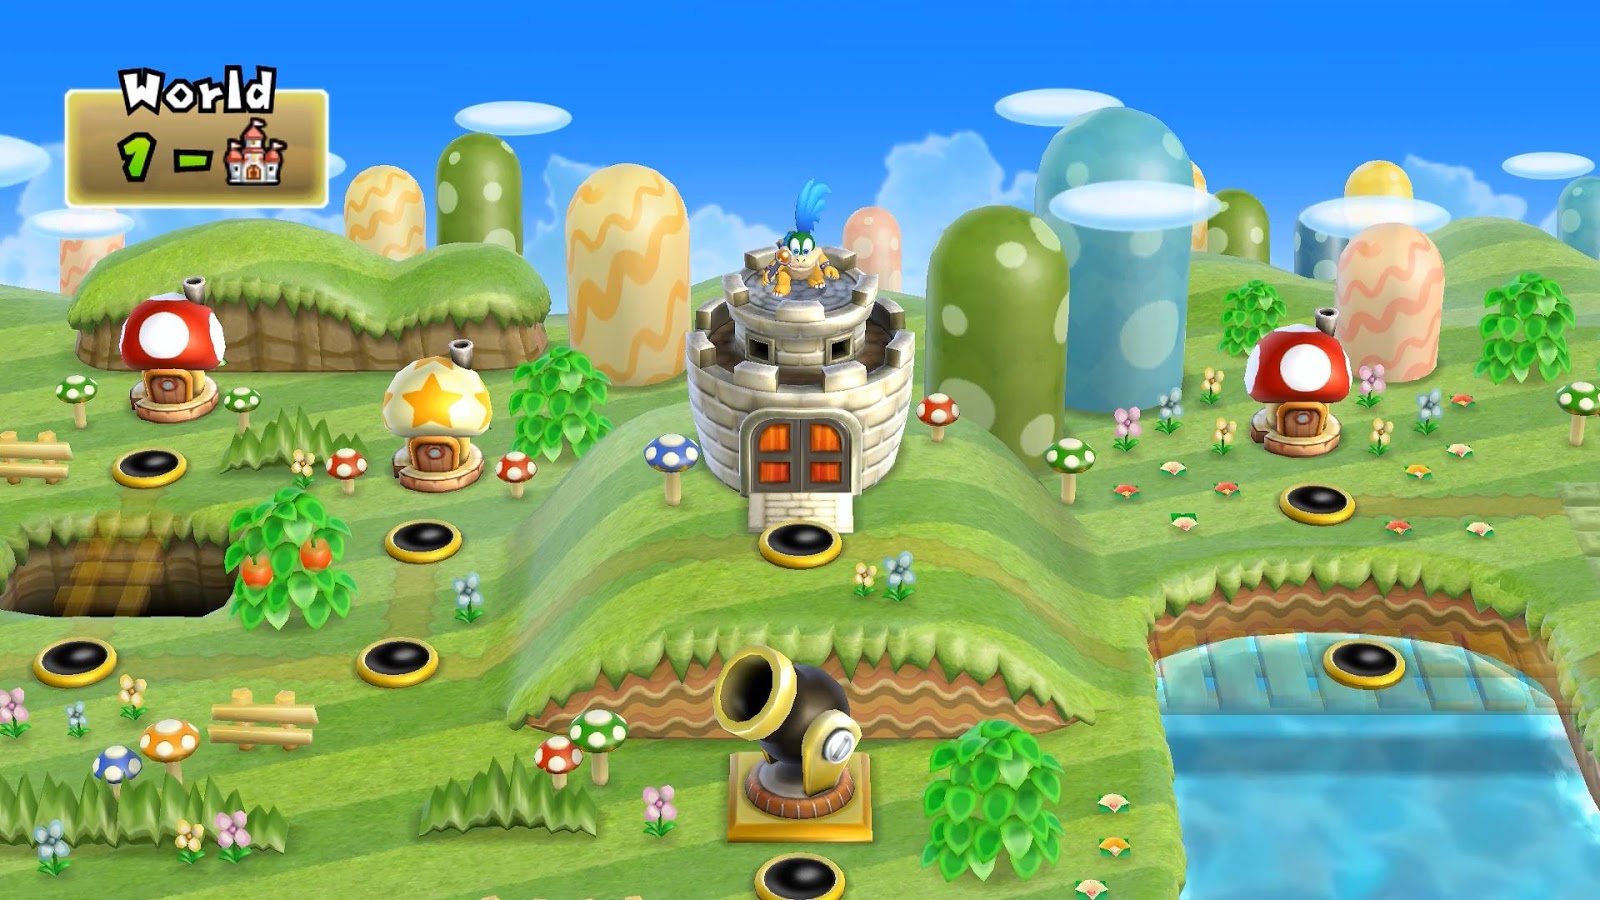 how to get to cannon in world 1 super mario bros wii